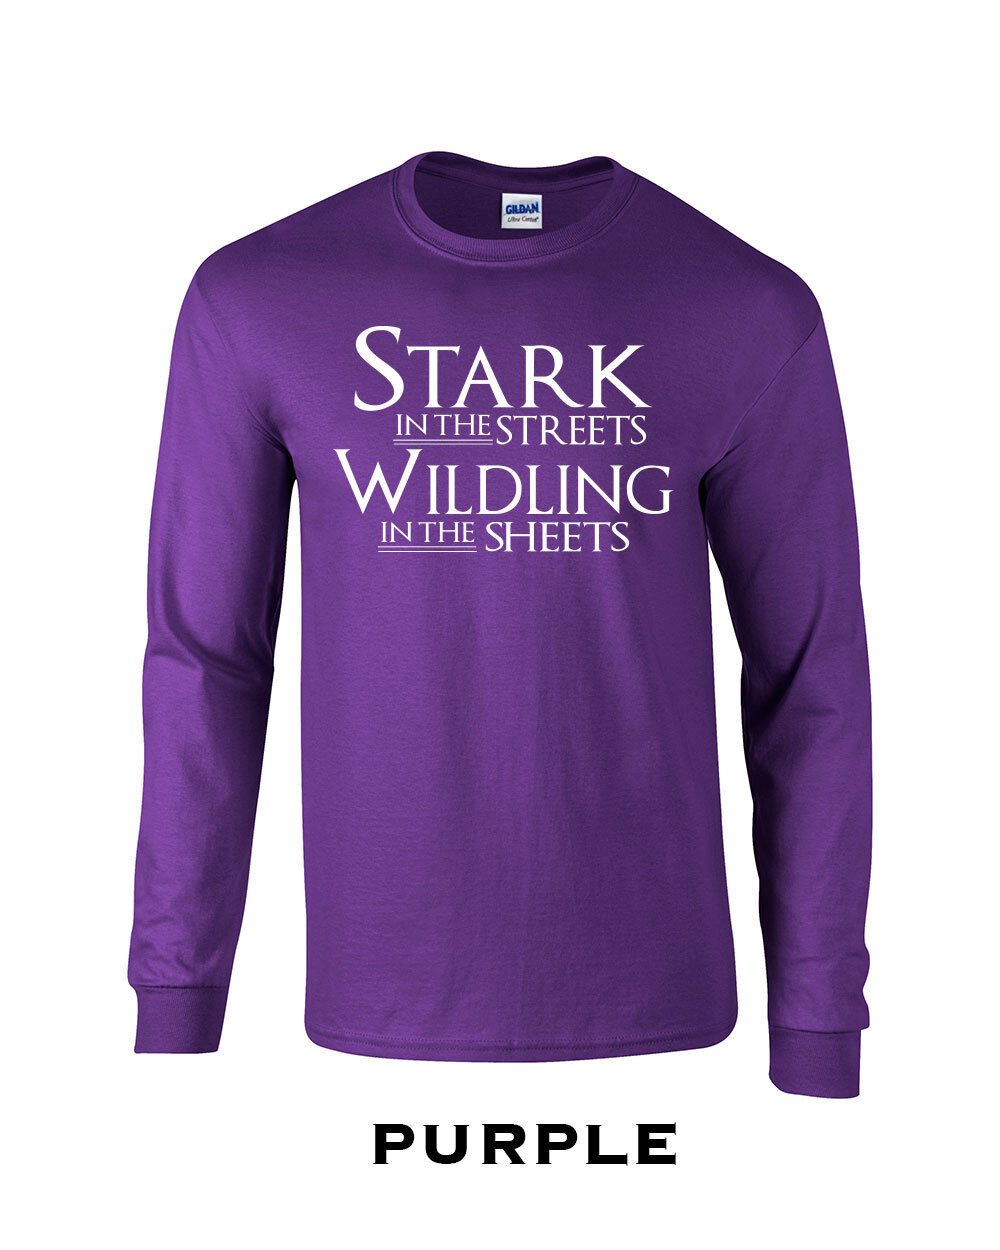 Stark in The Streets Wildling in The Sheets Full Long Sleeve Tee T-Shirt 